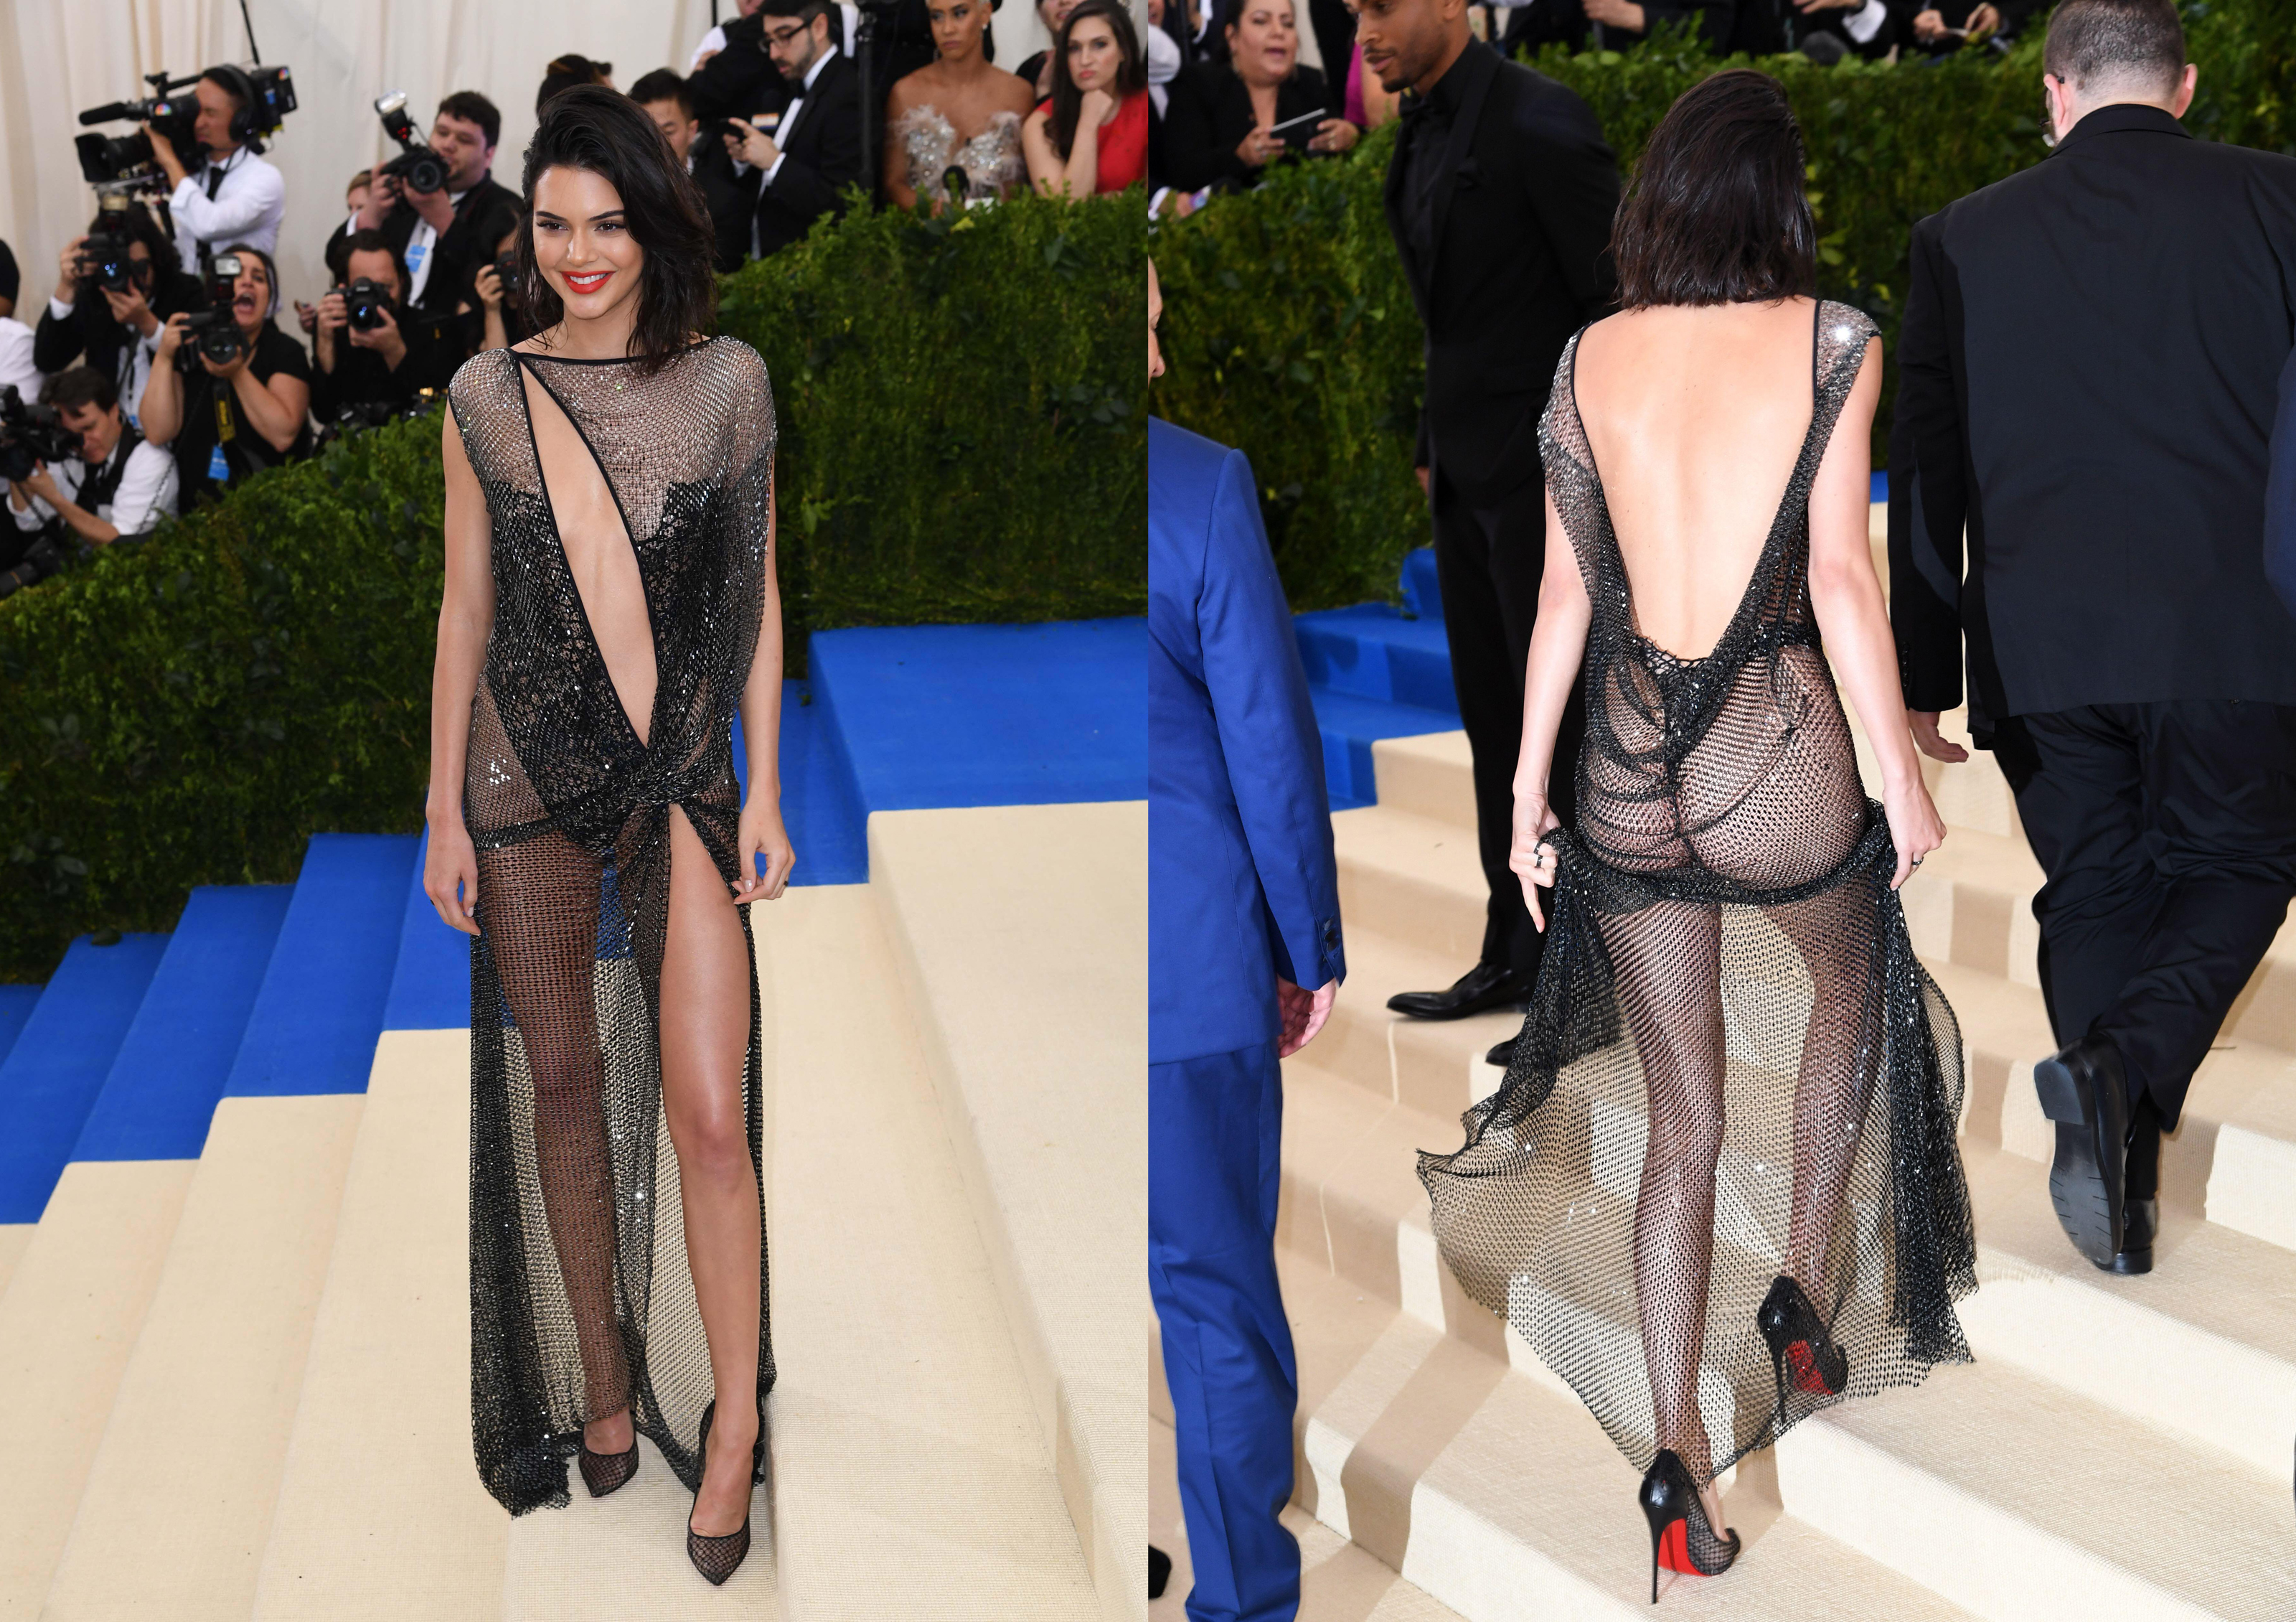 Kendall Jenner at the 2017 Met Gala